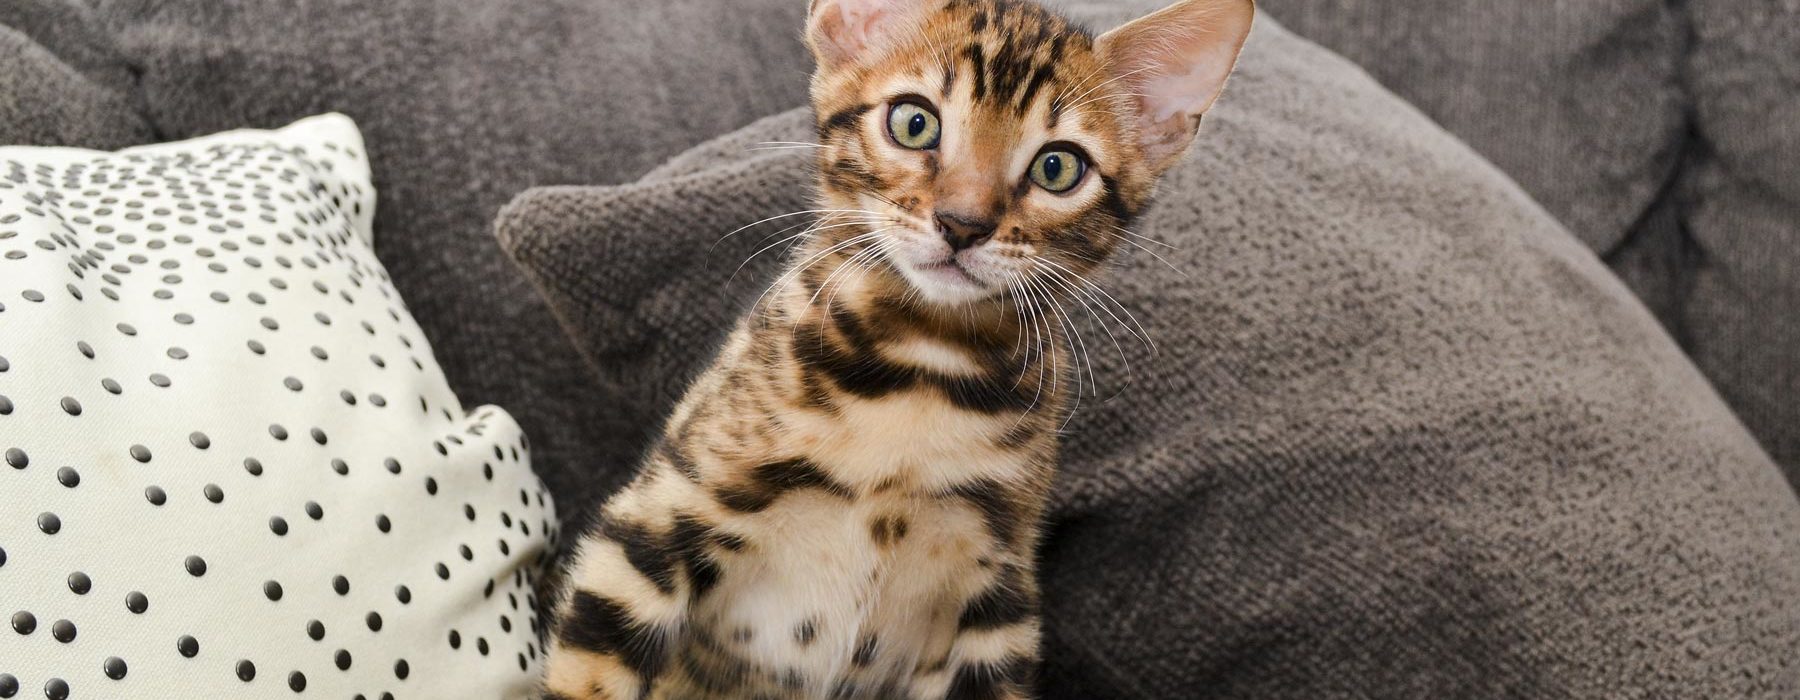 Bengal Cat Personality 5 Unique And Entertaining Traits The Bengal Connection